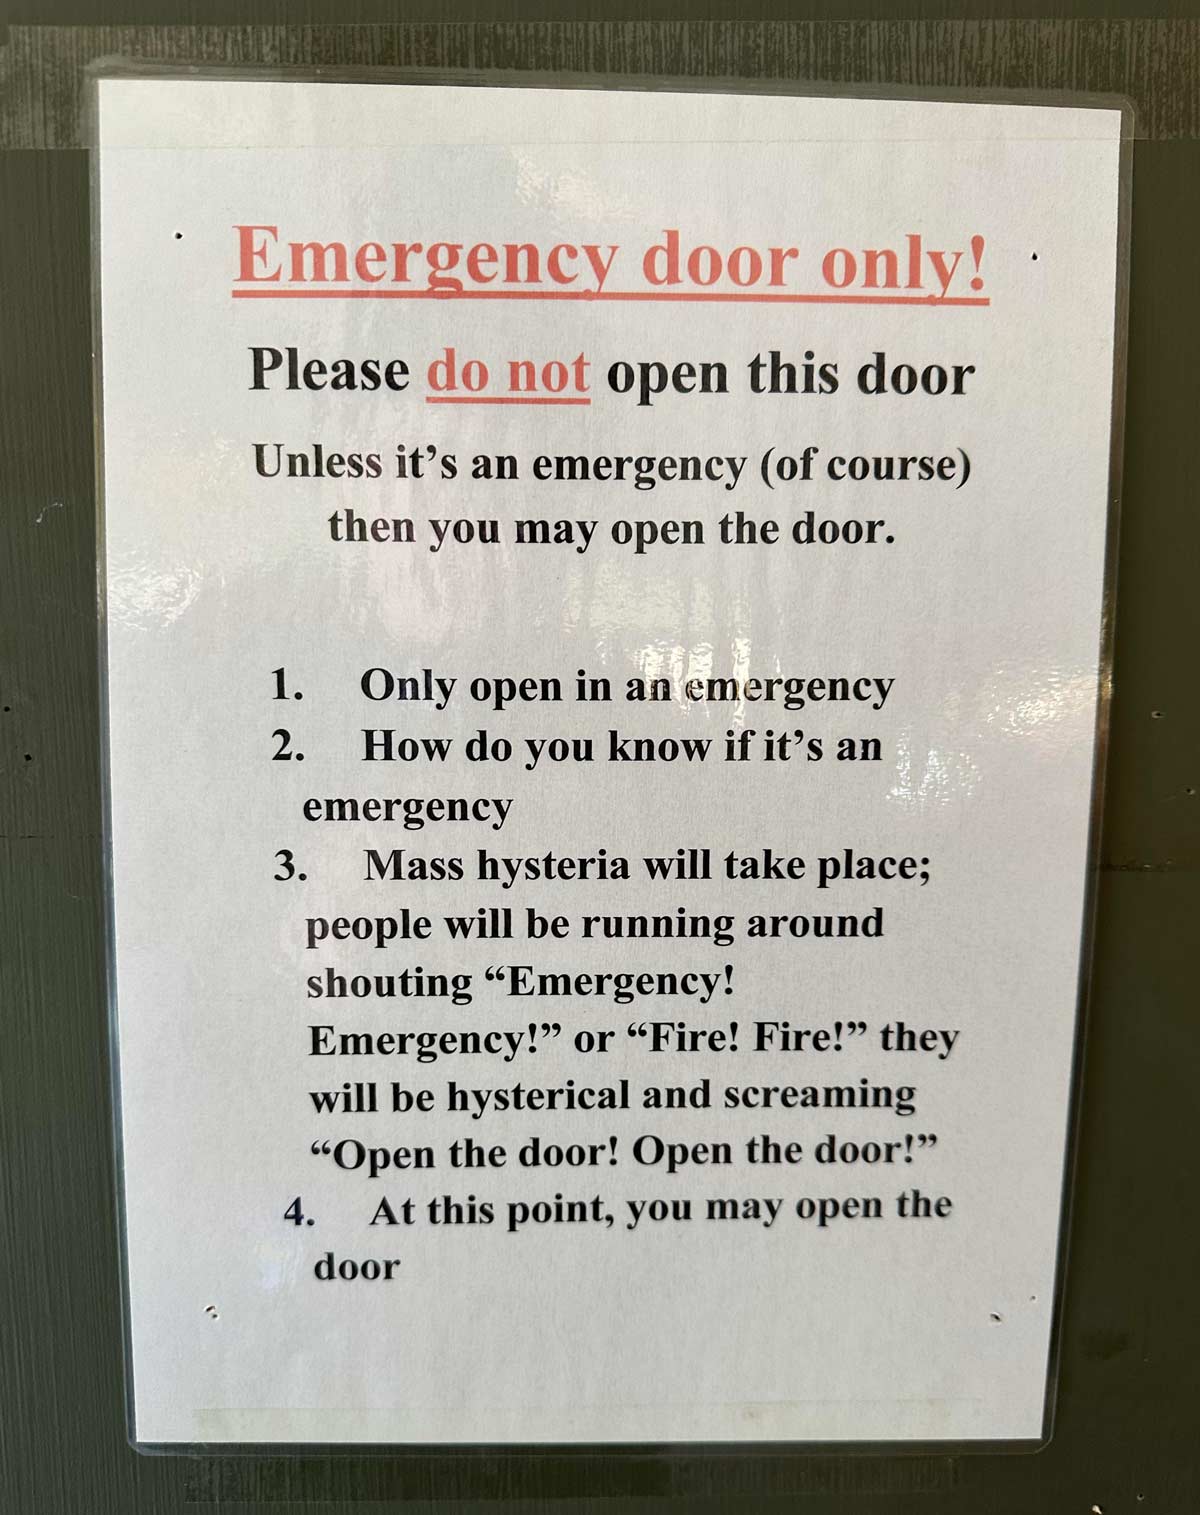 How do you know if it’s an emergency